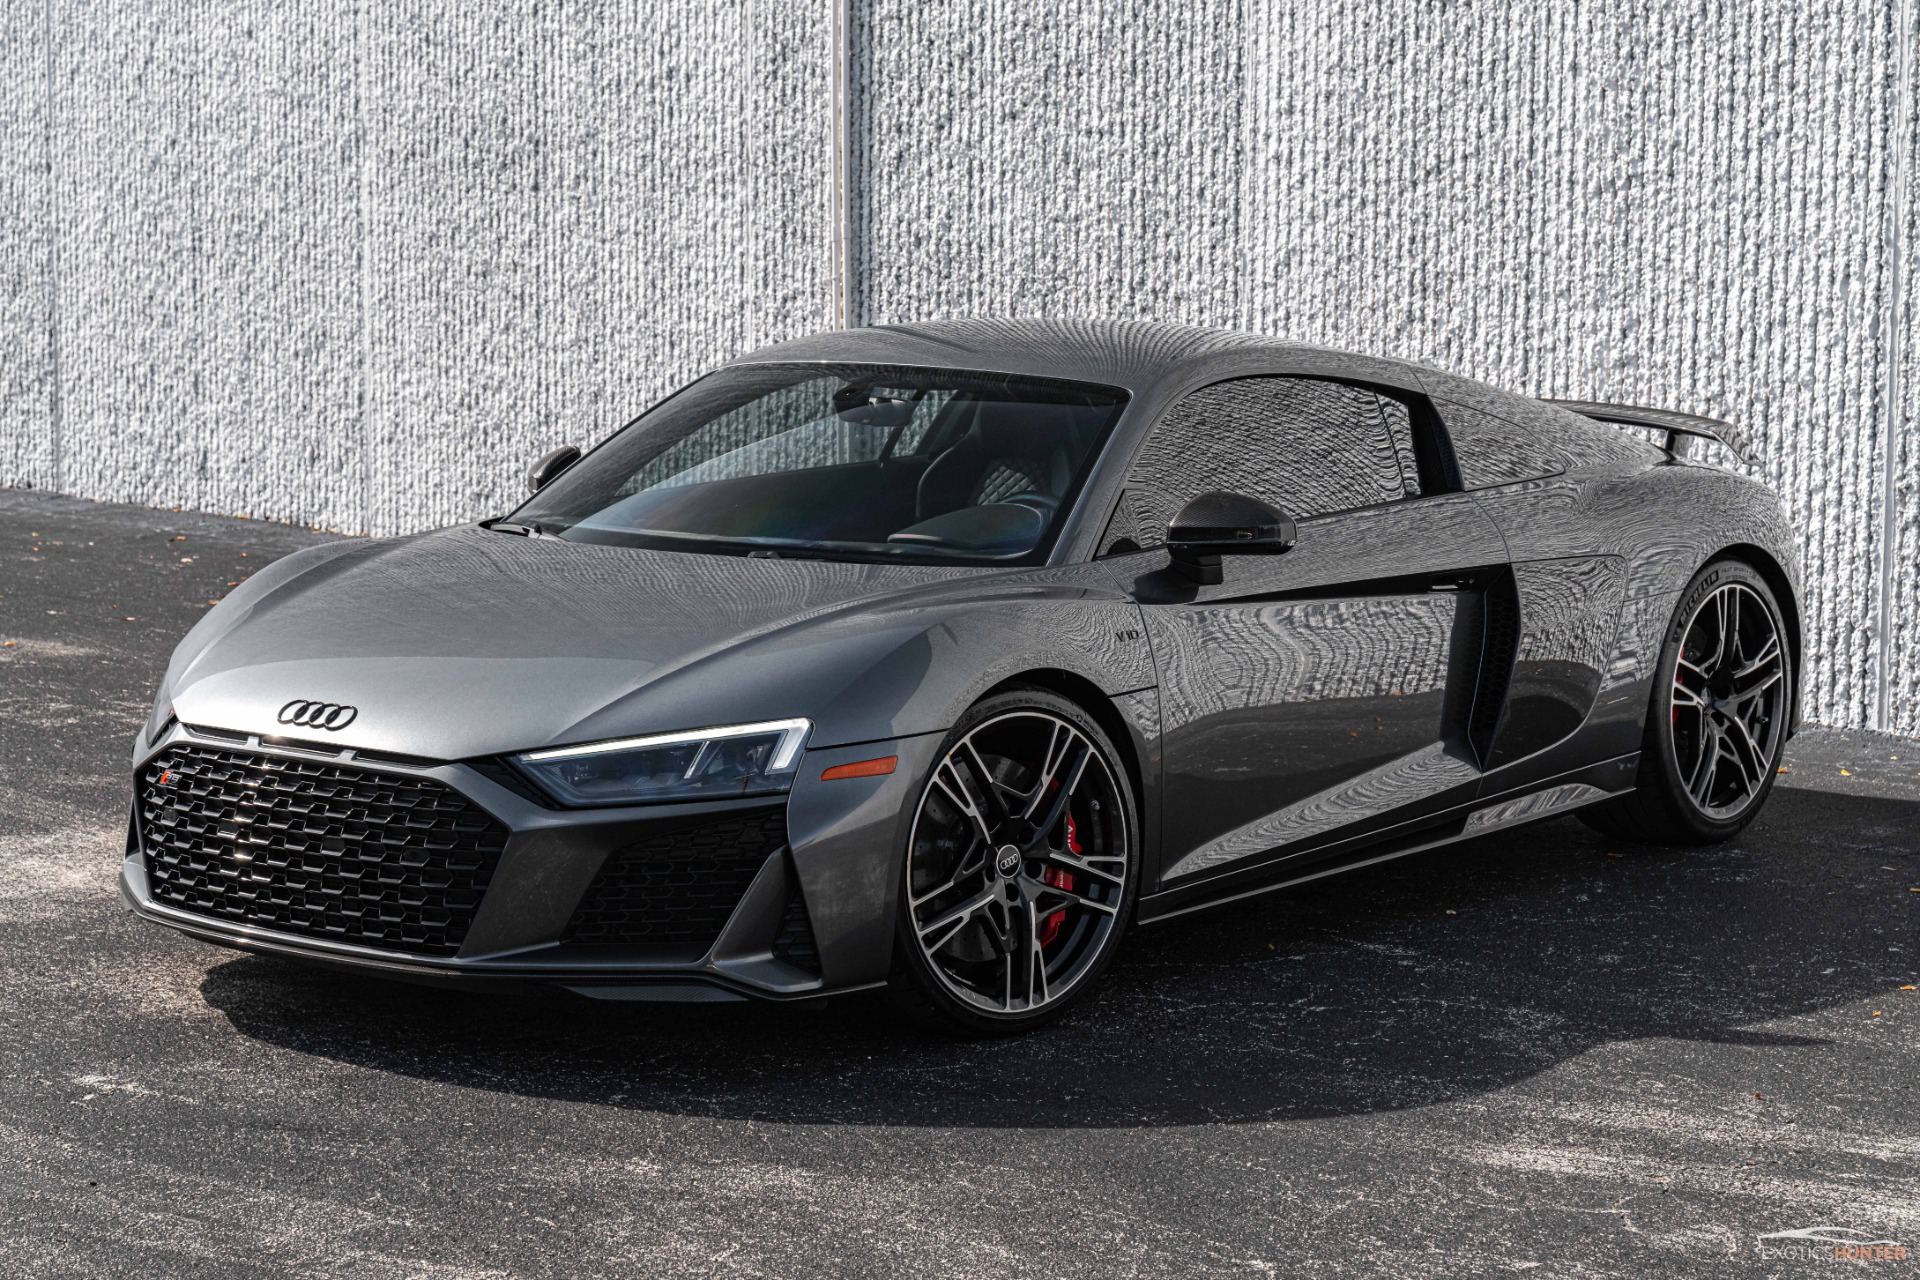 Used 2021 Audi R8 5.2 quattro V10 performance w/ Carbon Front 